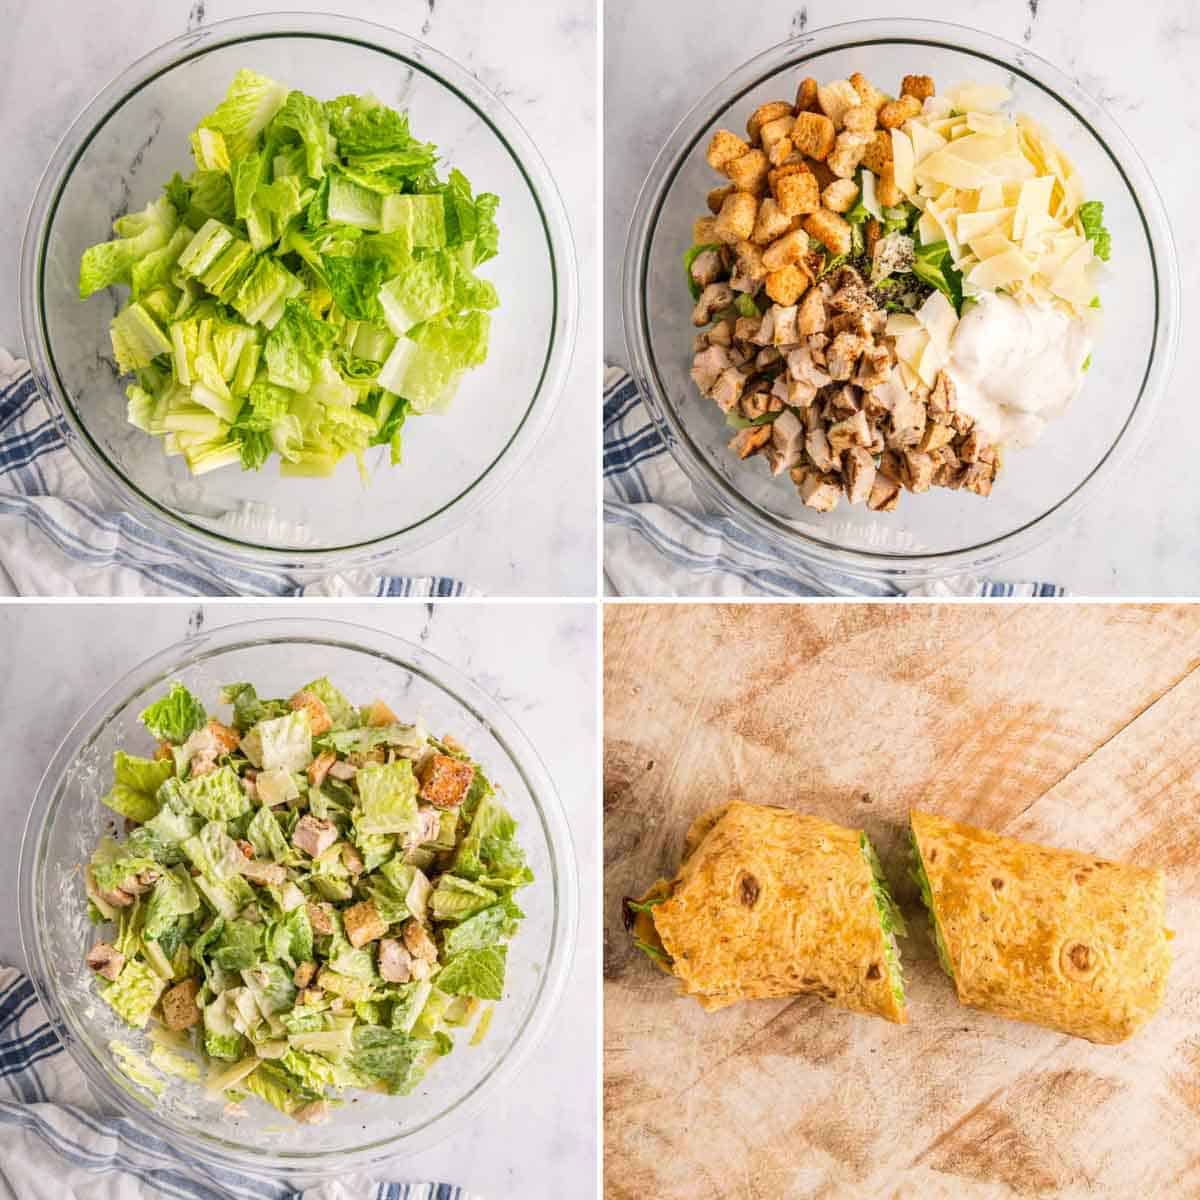 Four images showing the process of making a chicken caesar wrap.